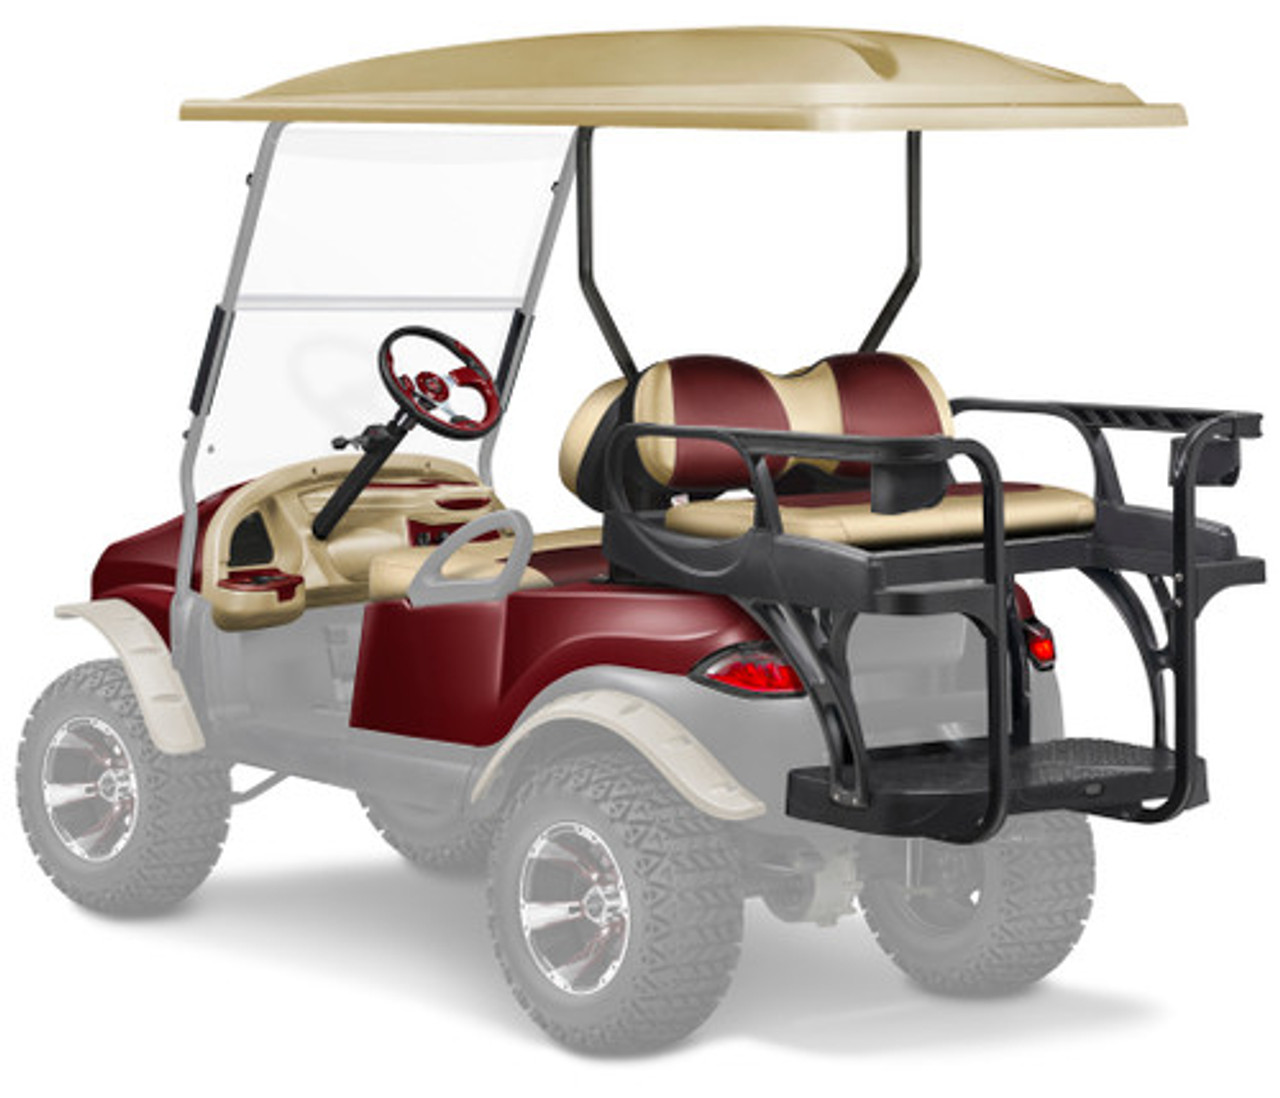 Upgrade Your Golf Cart with Doubletake Golf Cart Accessories